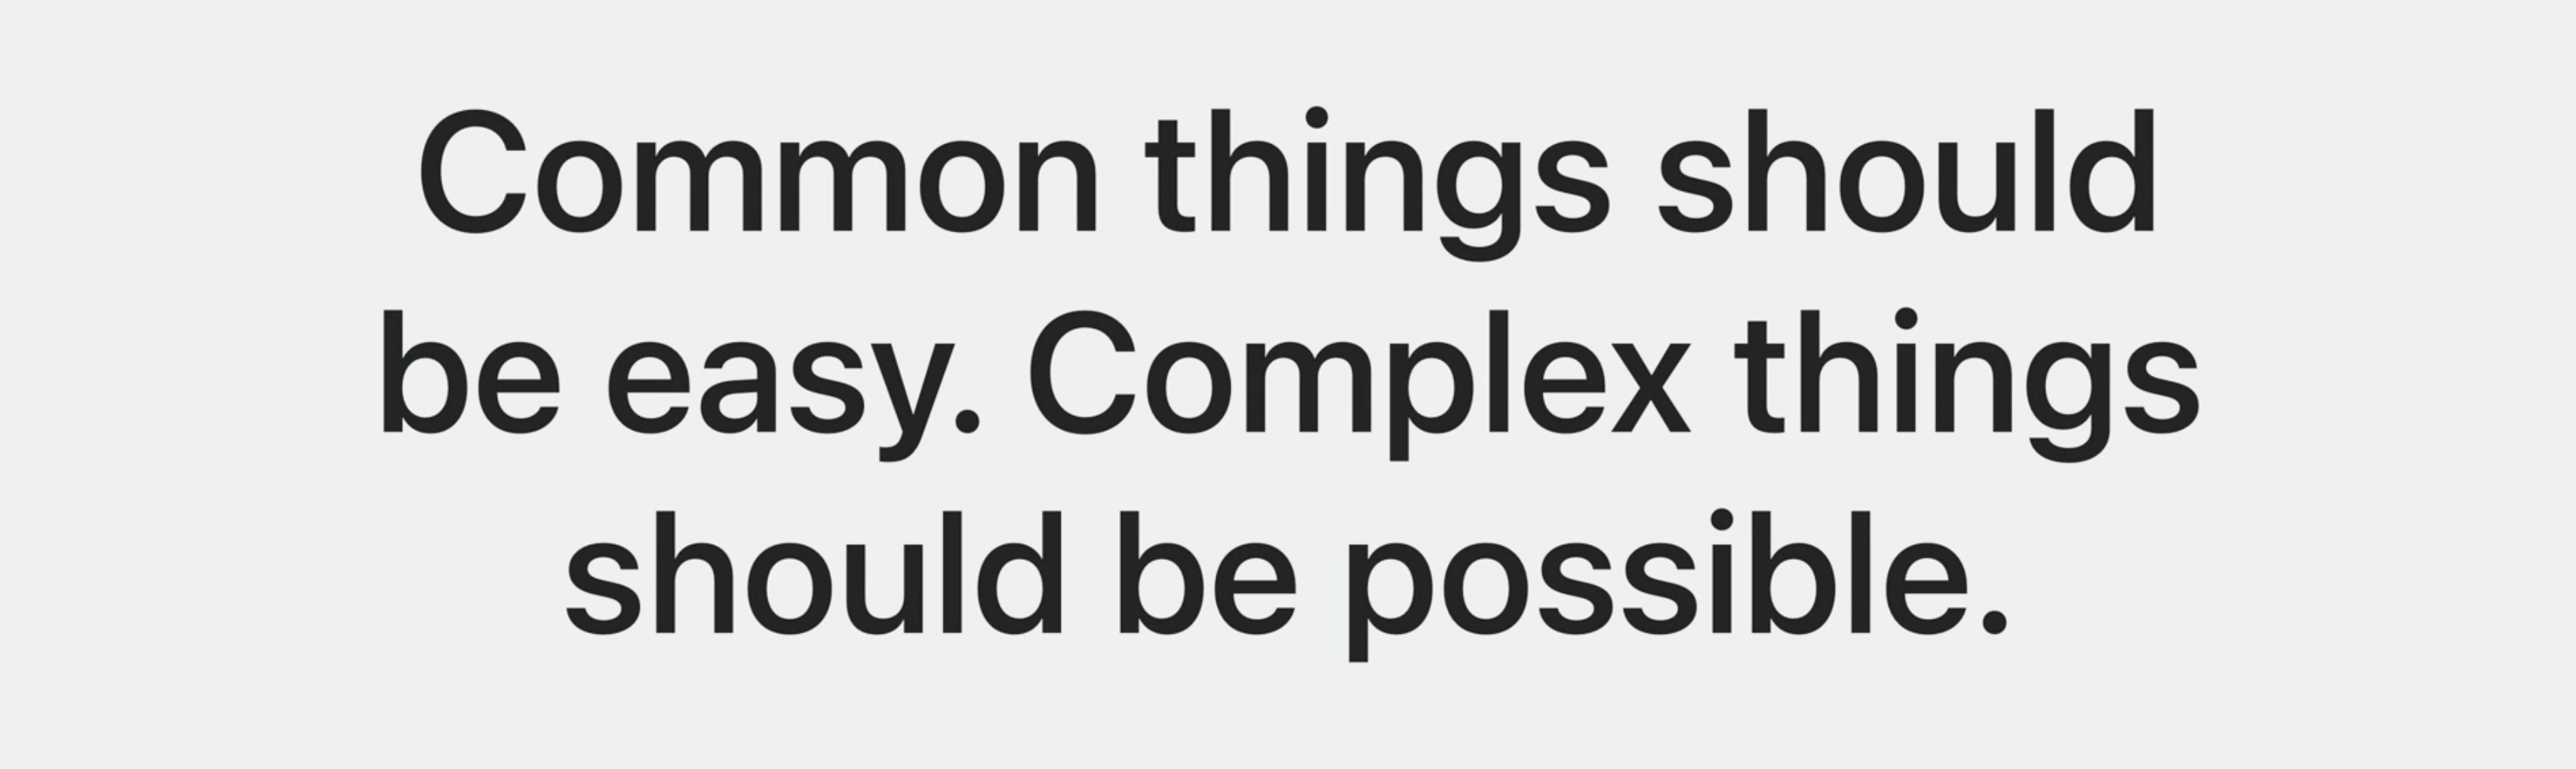 common things should be easy and complex things should be possible